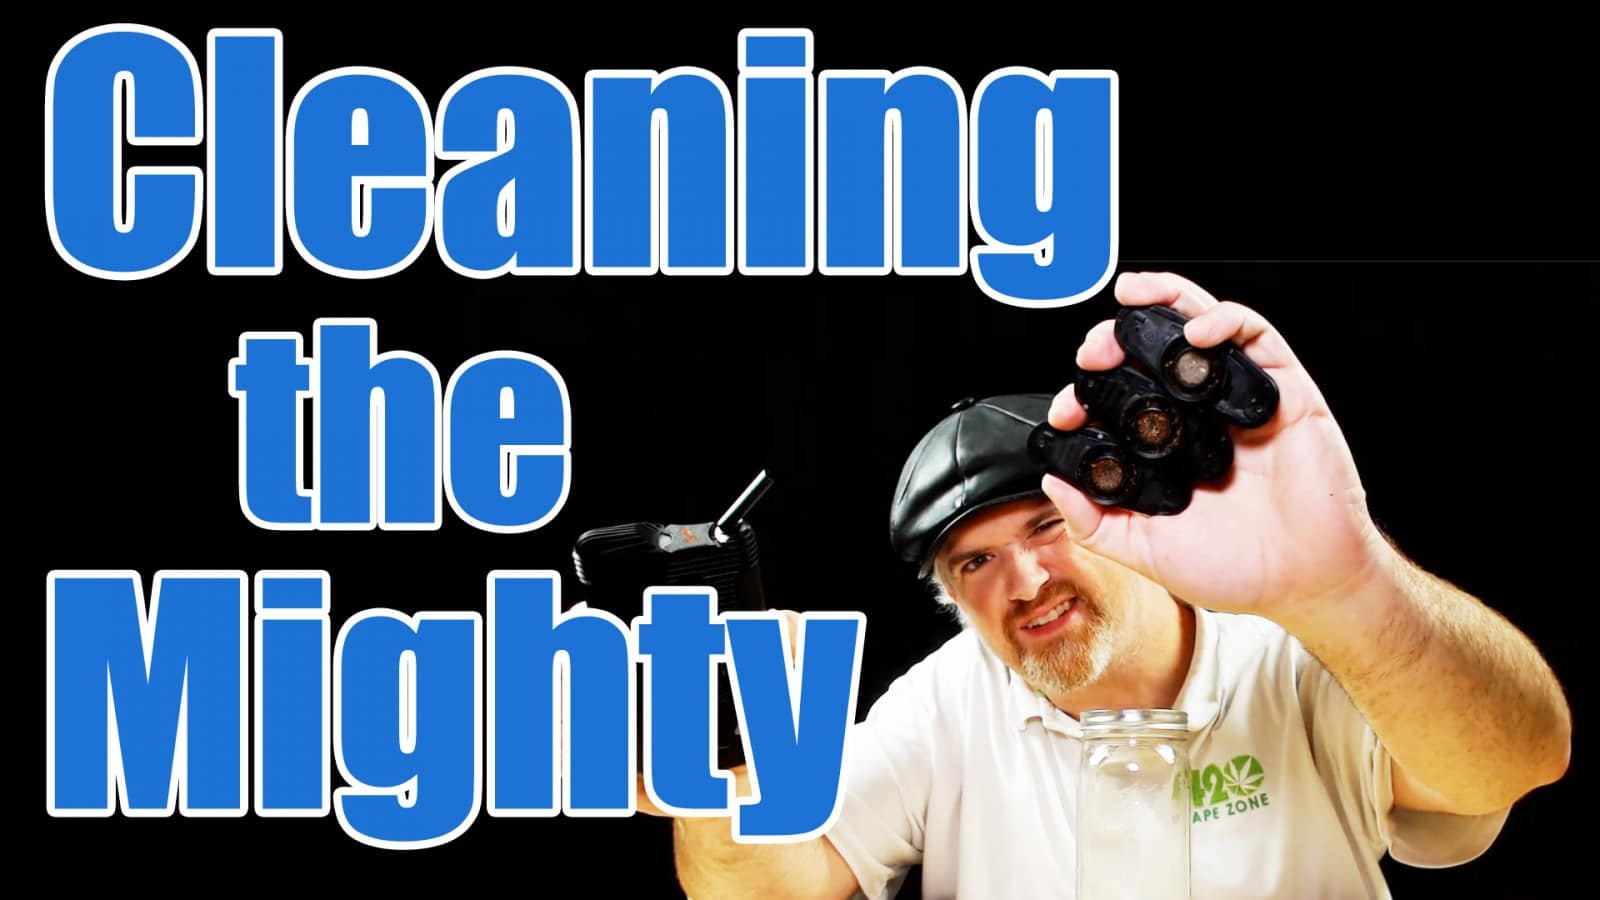 UPDATED Mighty Cleaning Video | Fastest and Easiest way to clean the Mighty Vaporizer